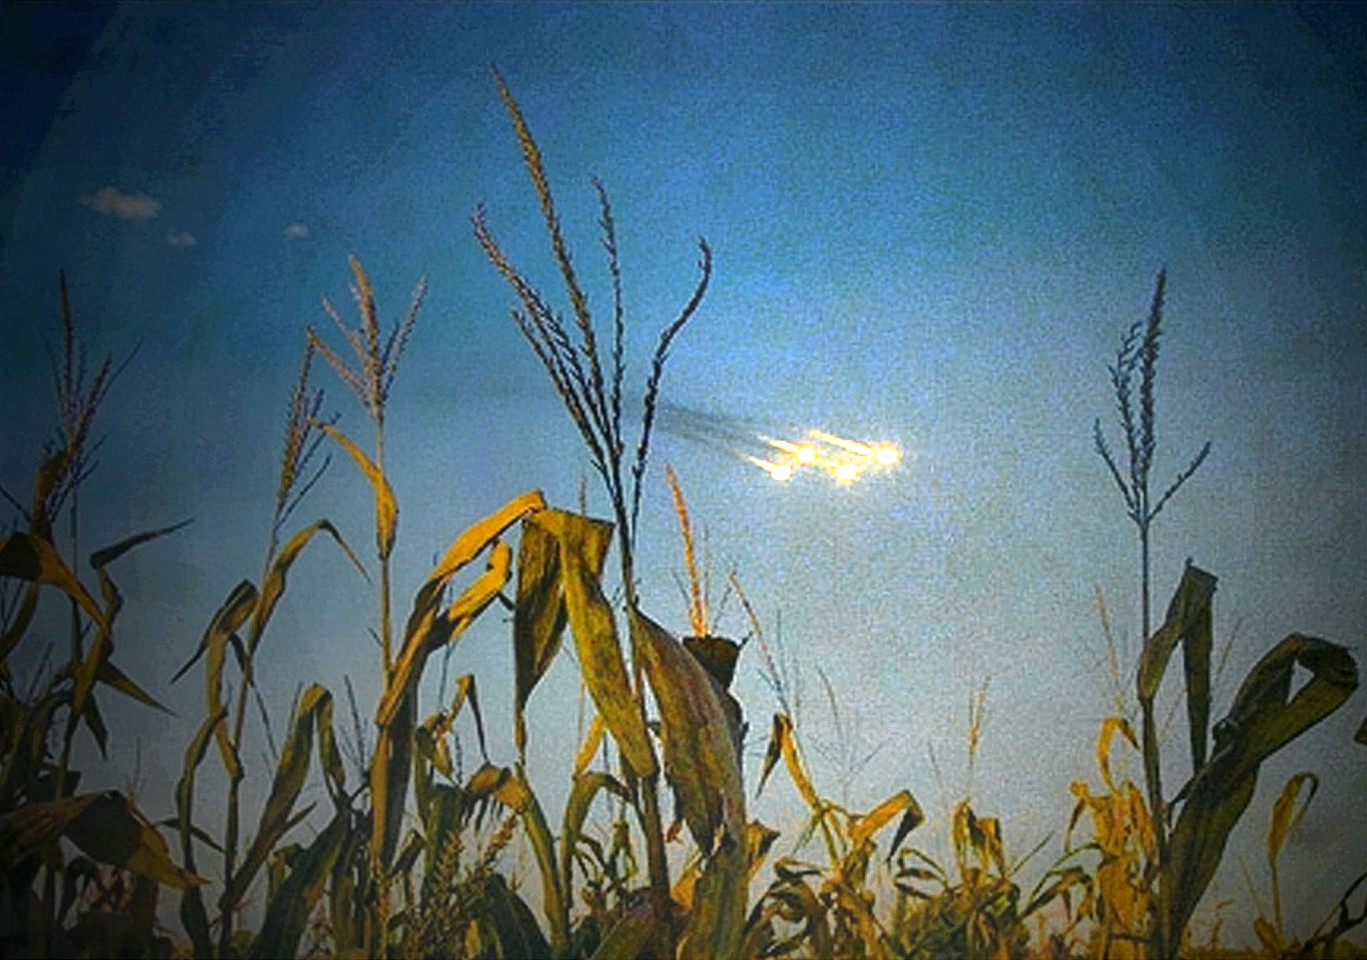 Oliver Wasow, Field and Lights
2009, Archival inkjet